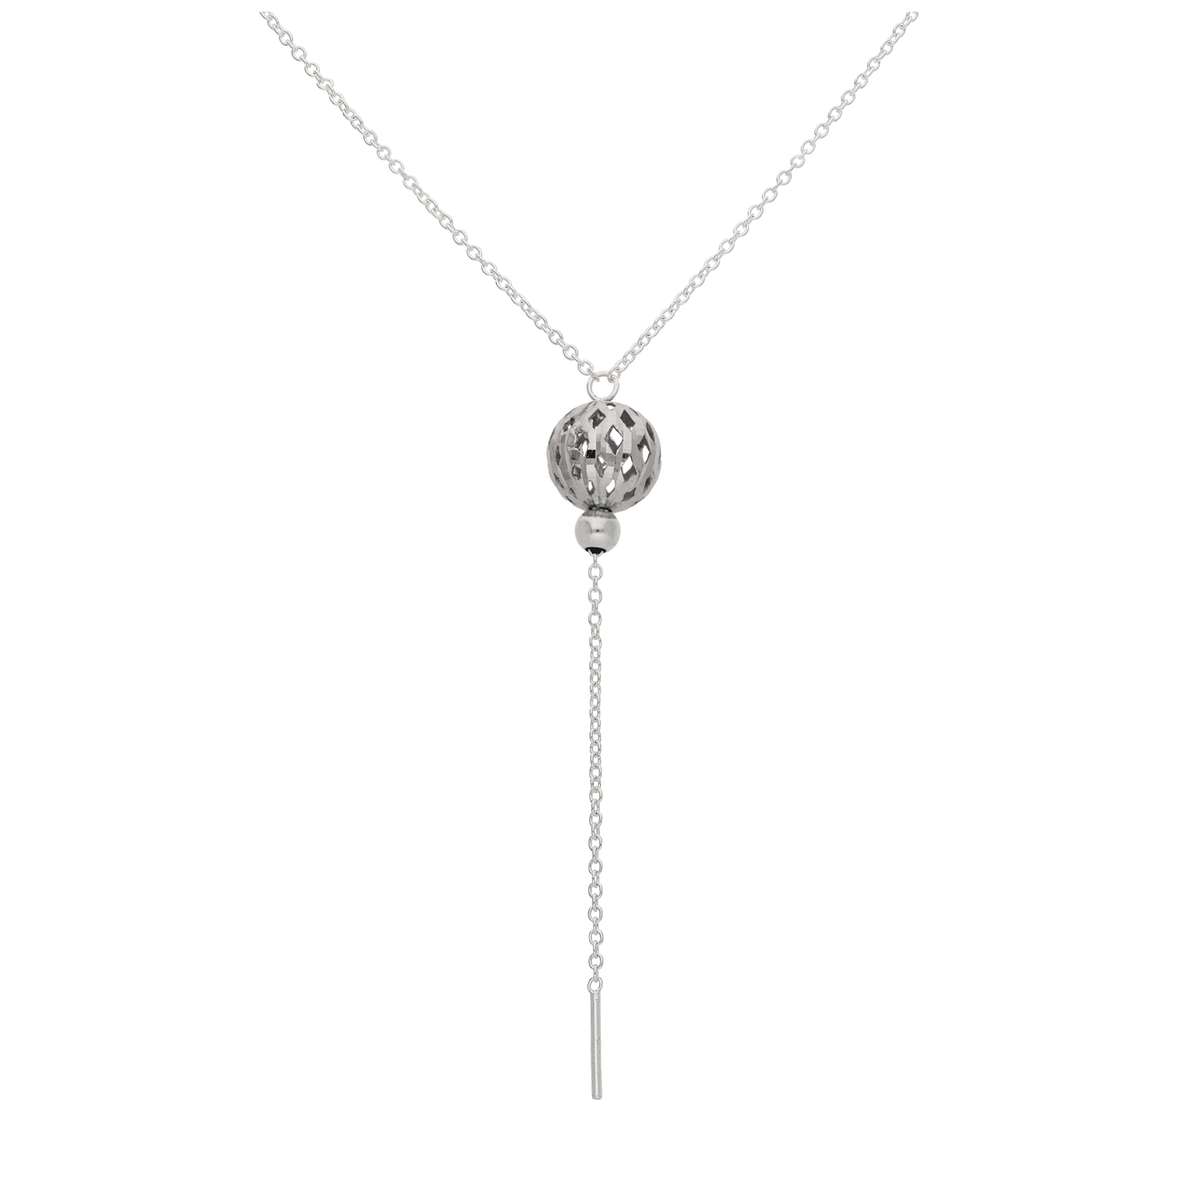 Sterling Silver 10mm Diamond Cut Ball 16 Inch Necklace